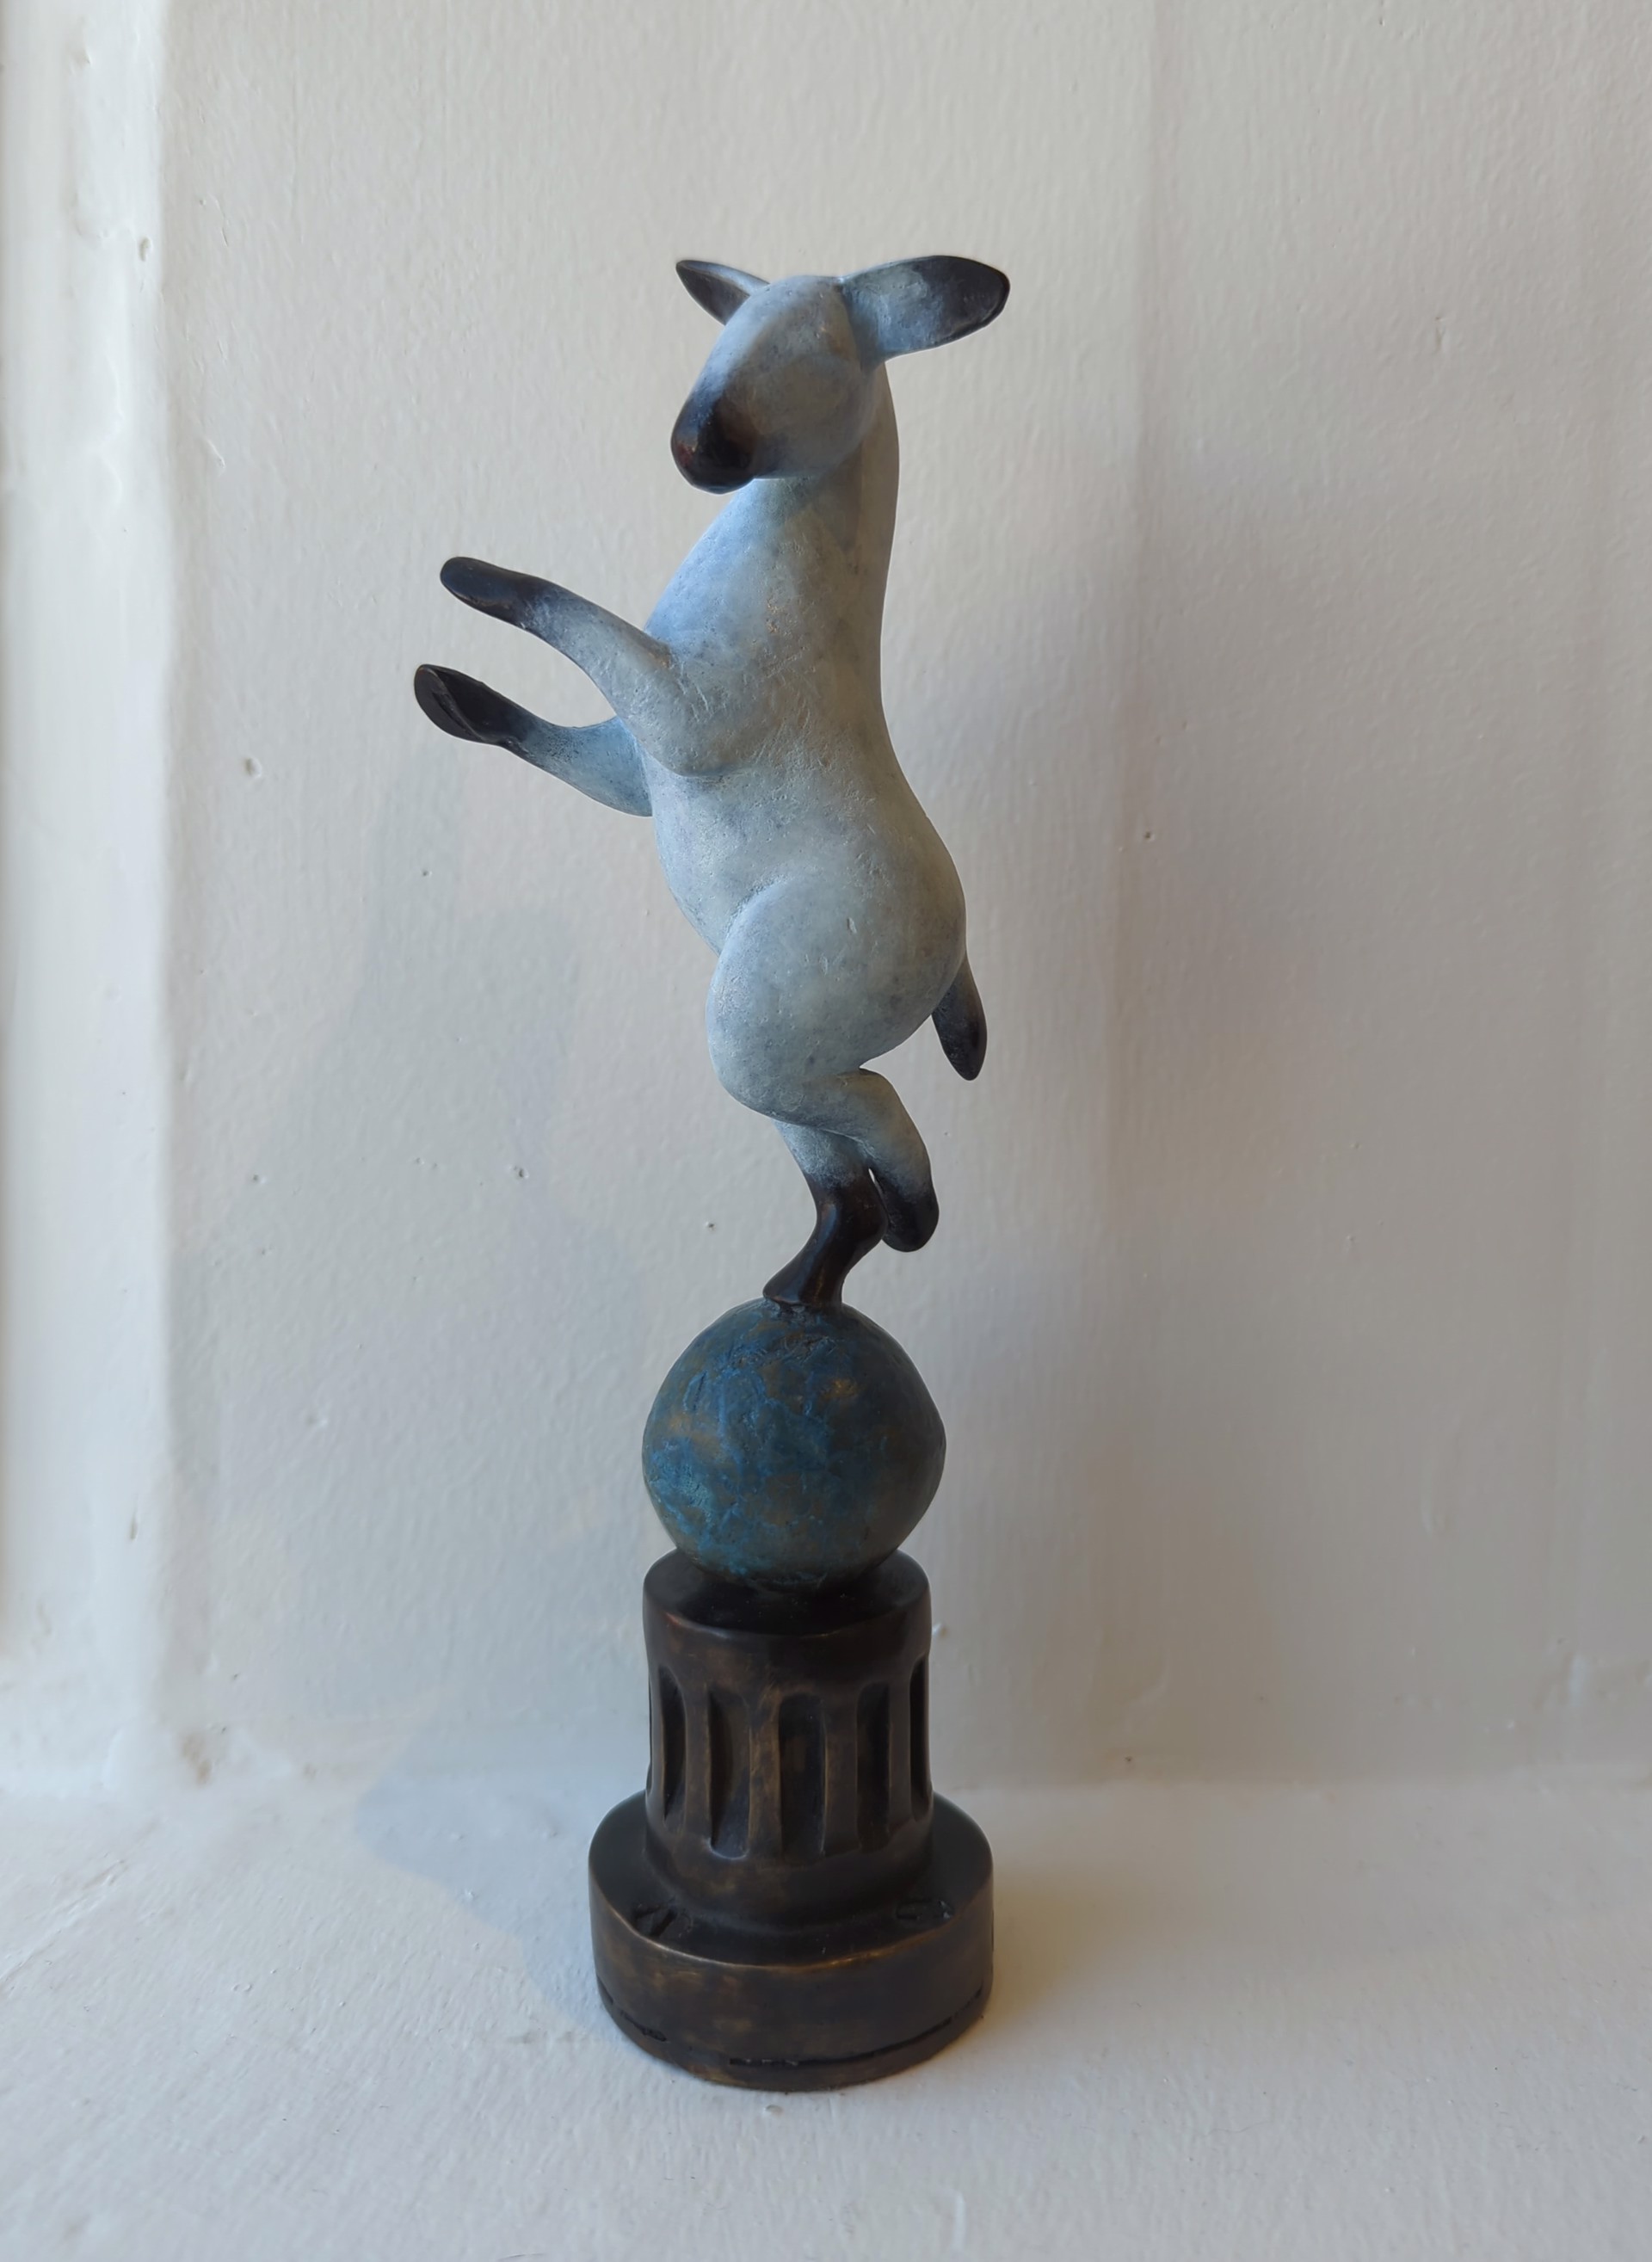 Burro on a Ball by Copper Tritscheller